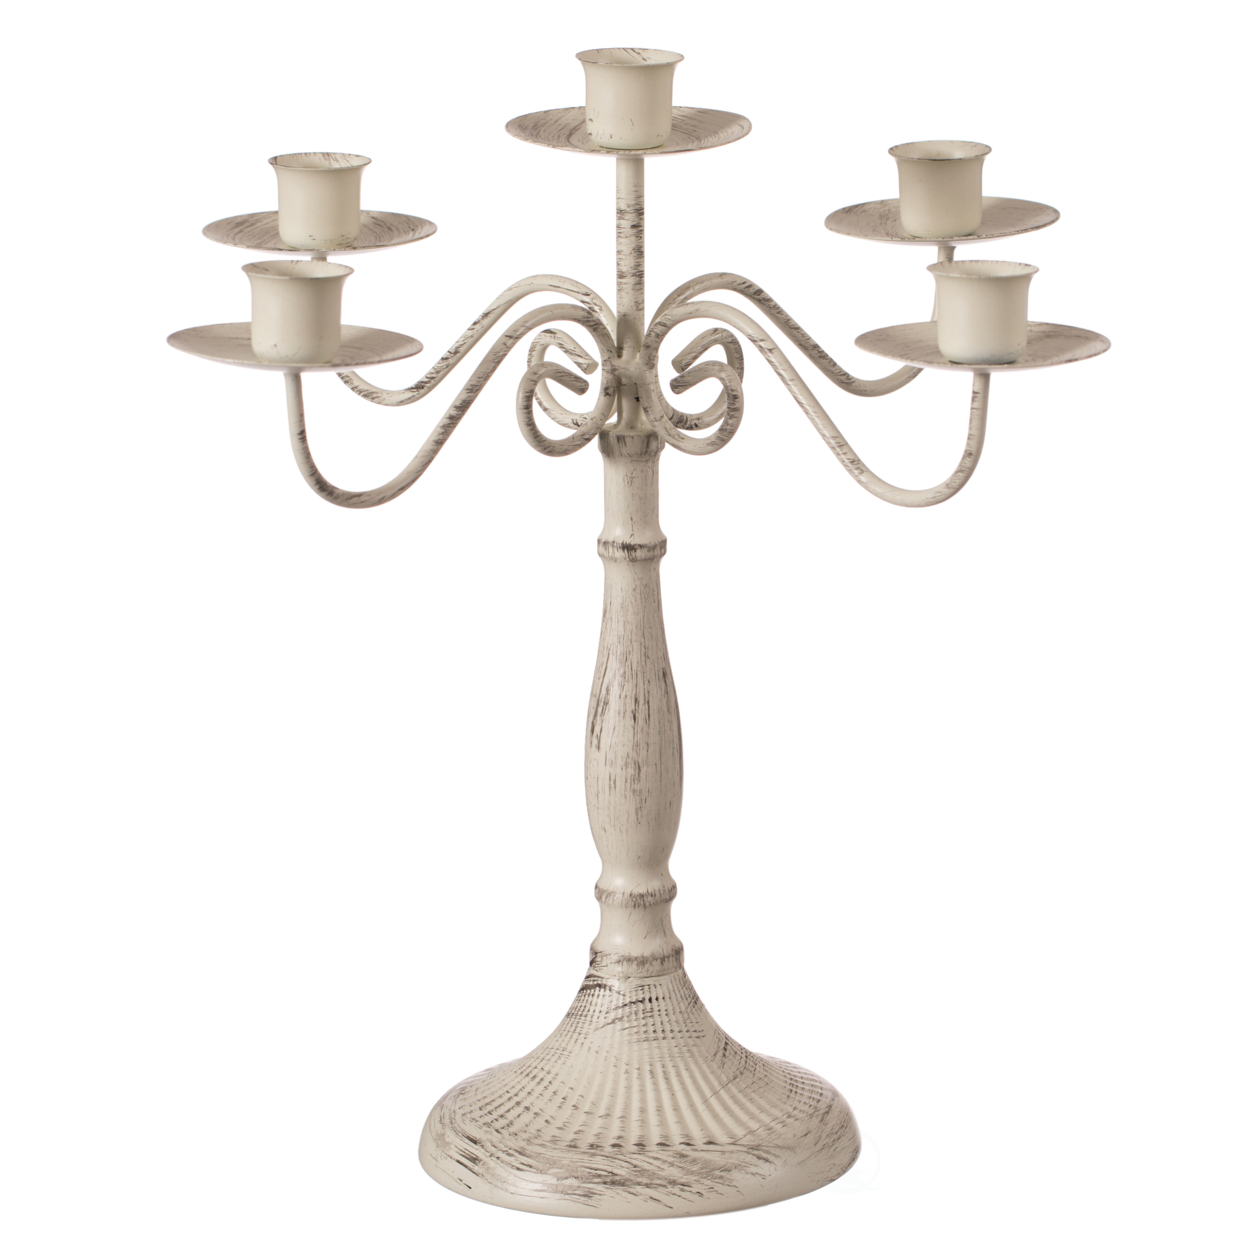 Antique Distressed Metal Candelabra and Candlestick for Dining Room, Entryway, Kitchen and Vanity - Five Arm